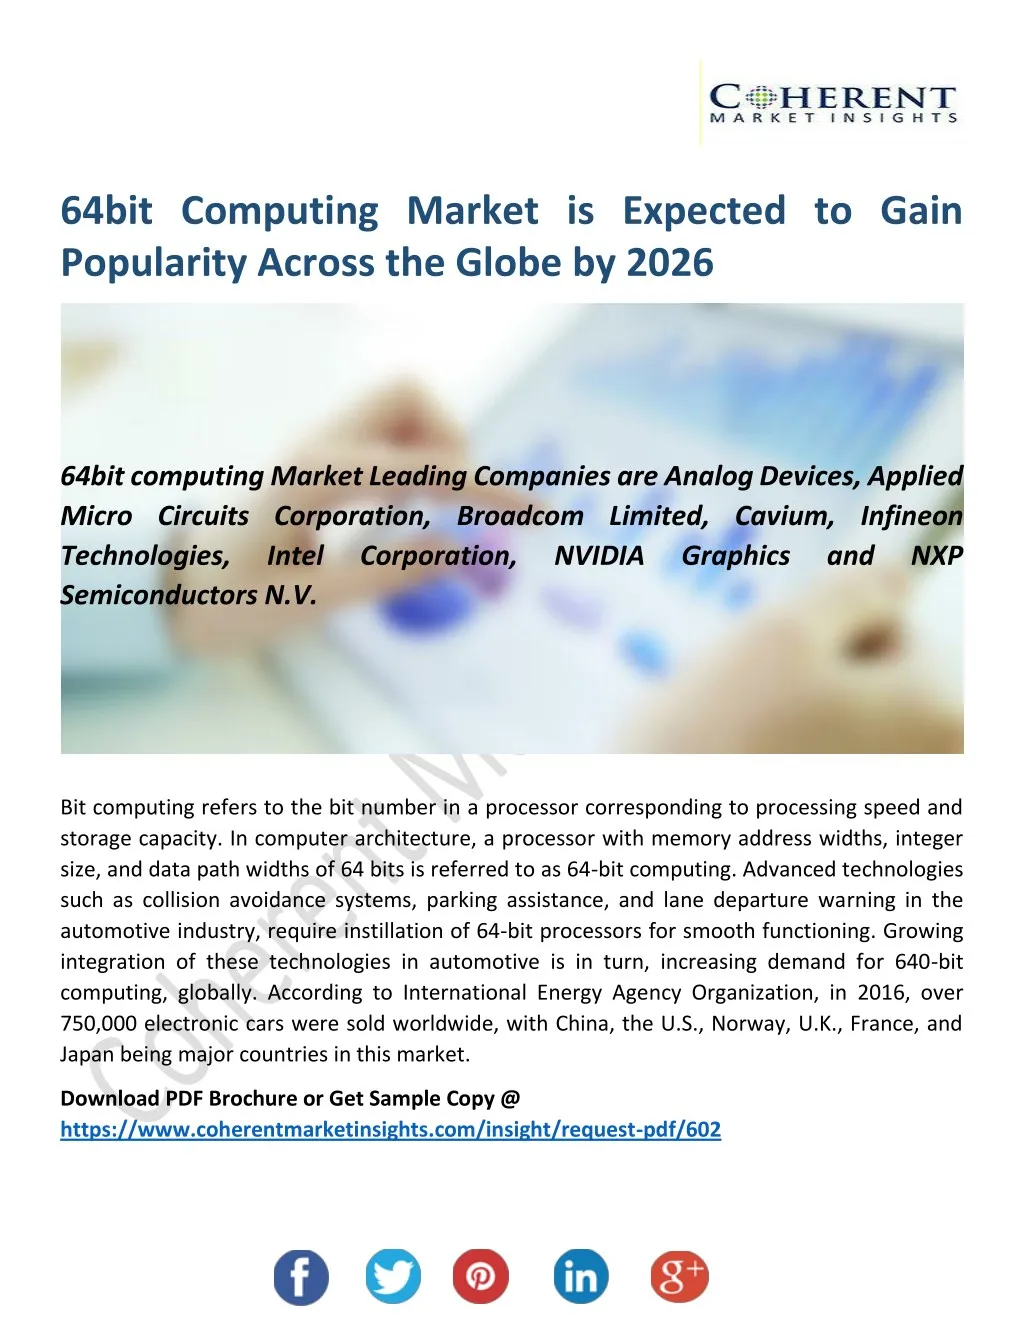 64bit computing market is expected to gain